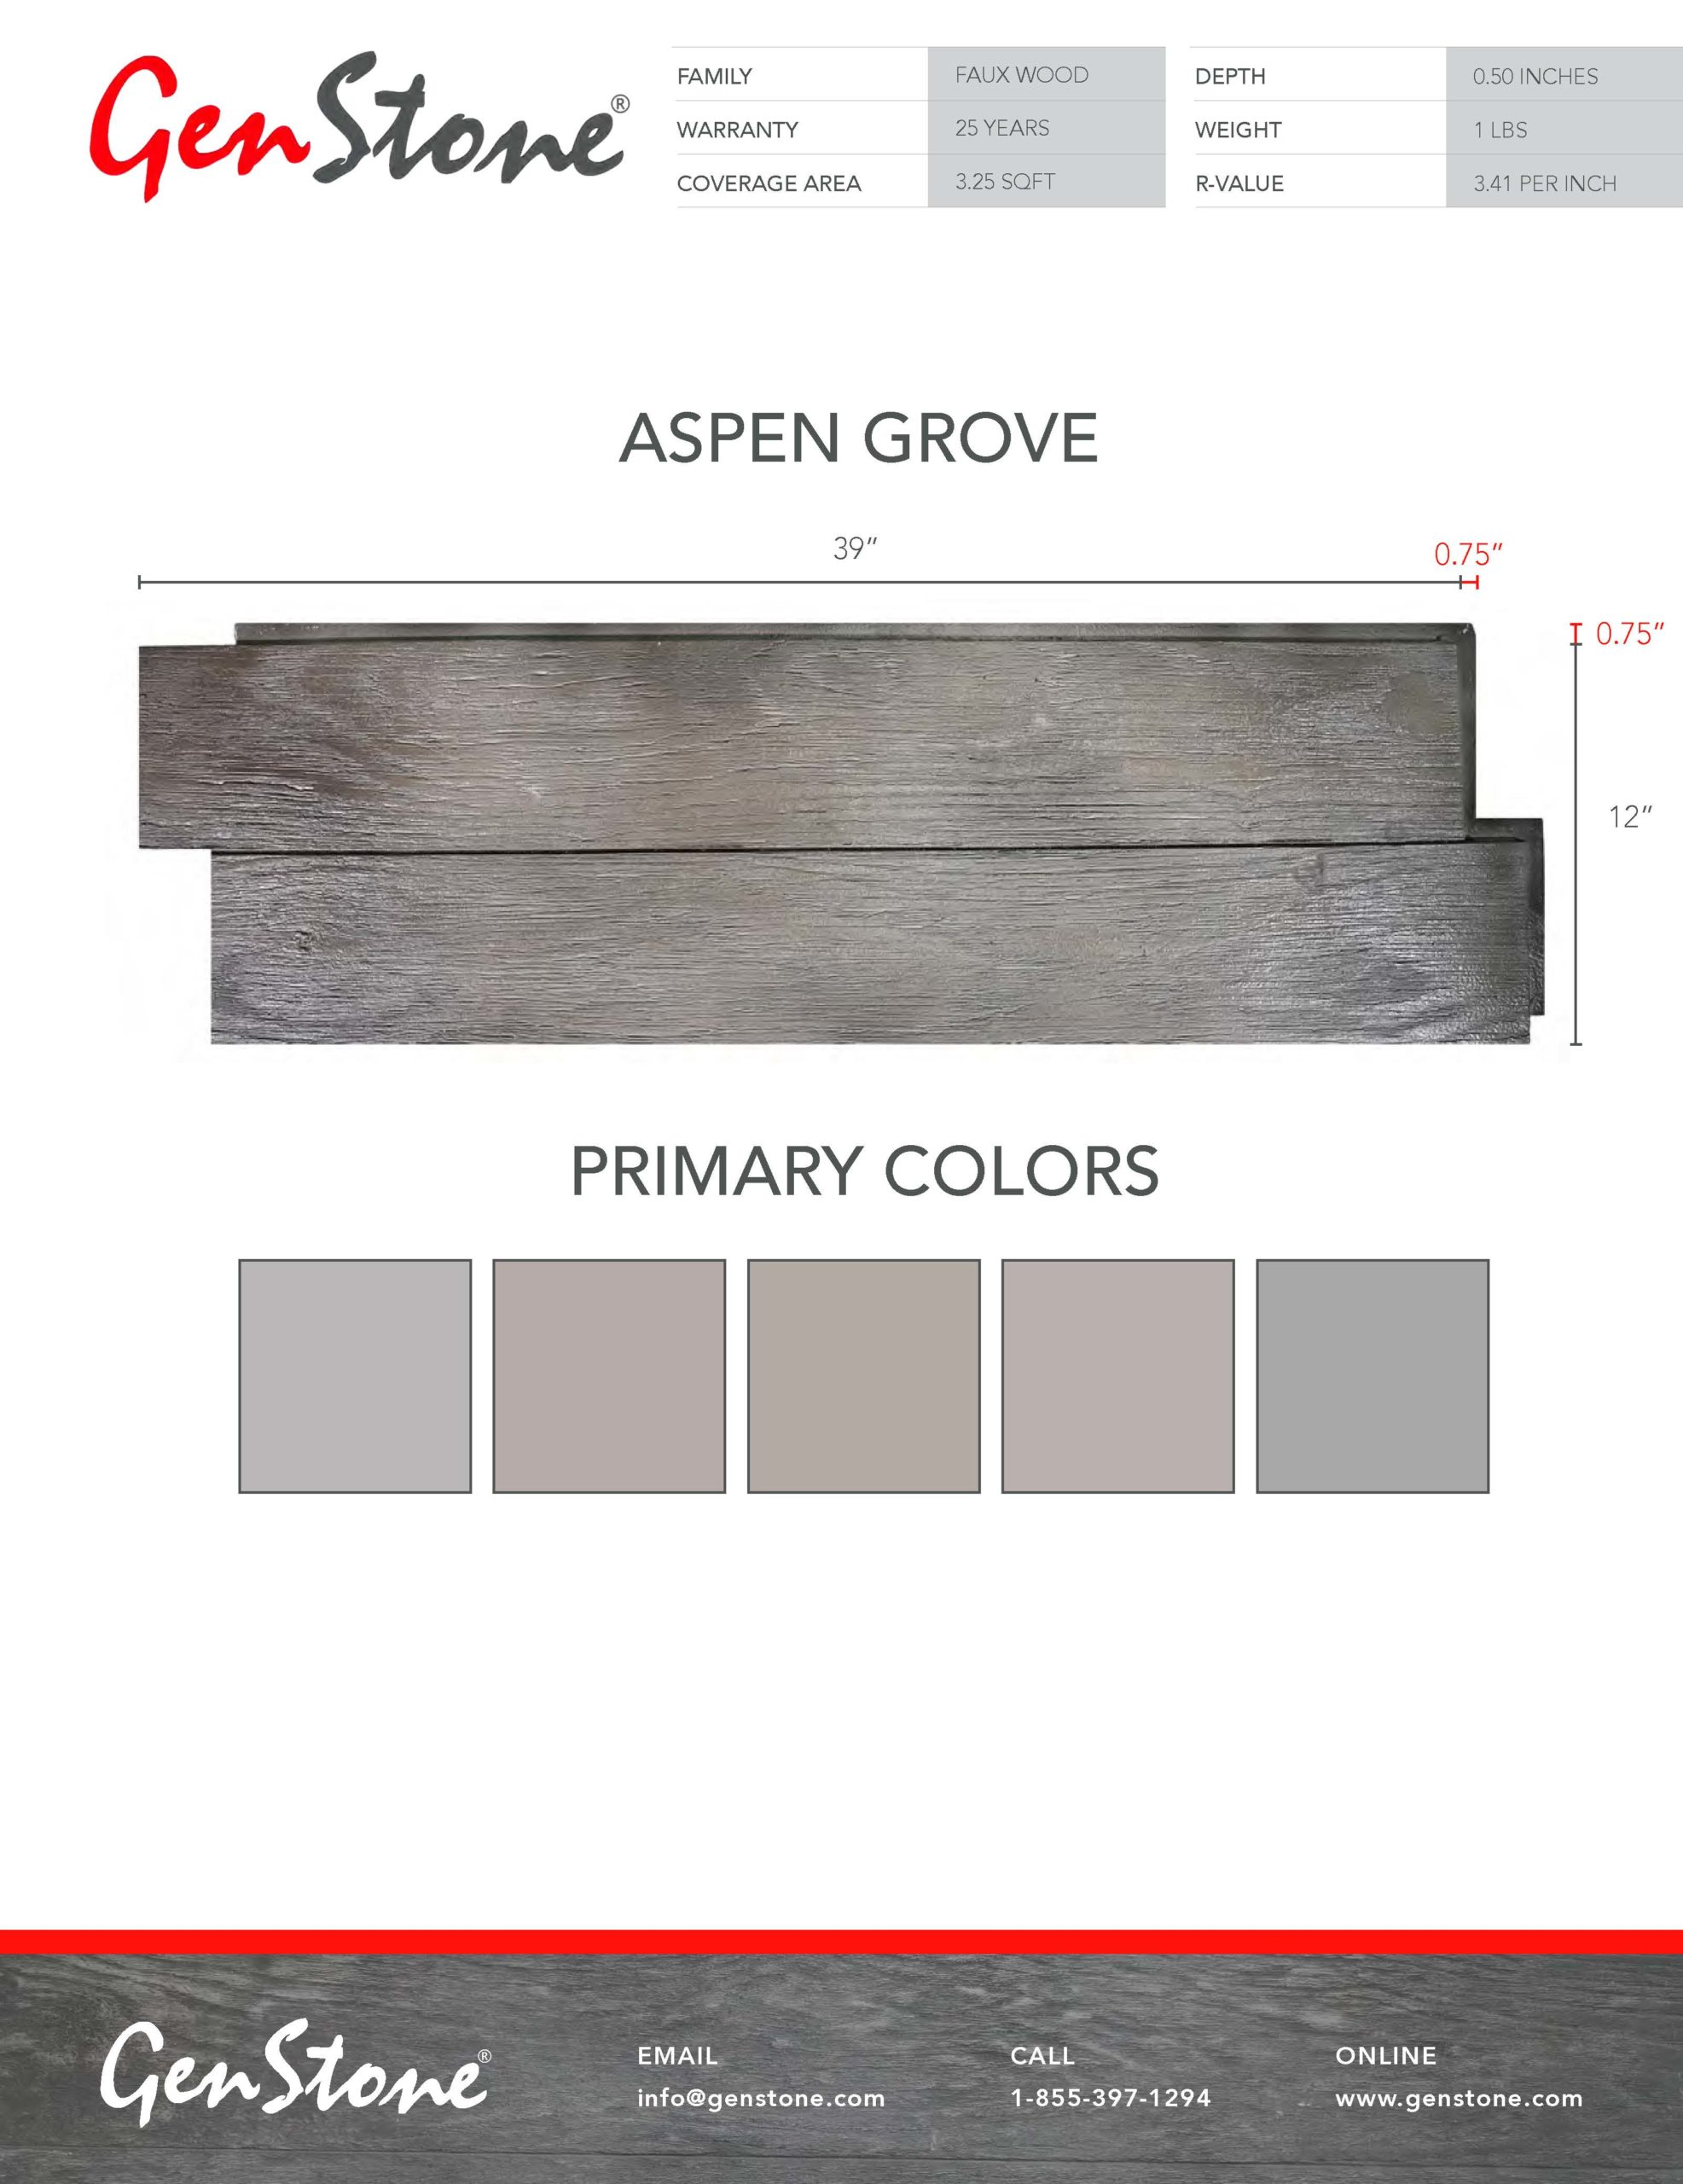 Aspen Grove Faux Wood Wall System